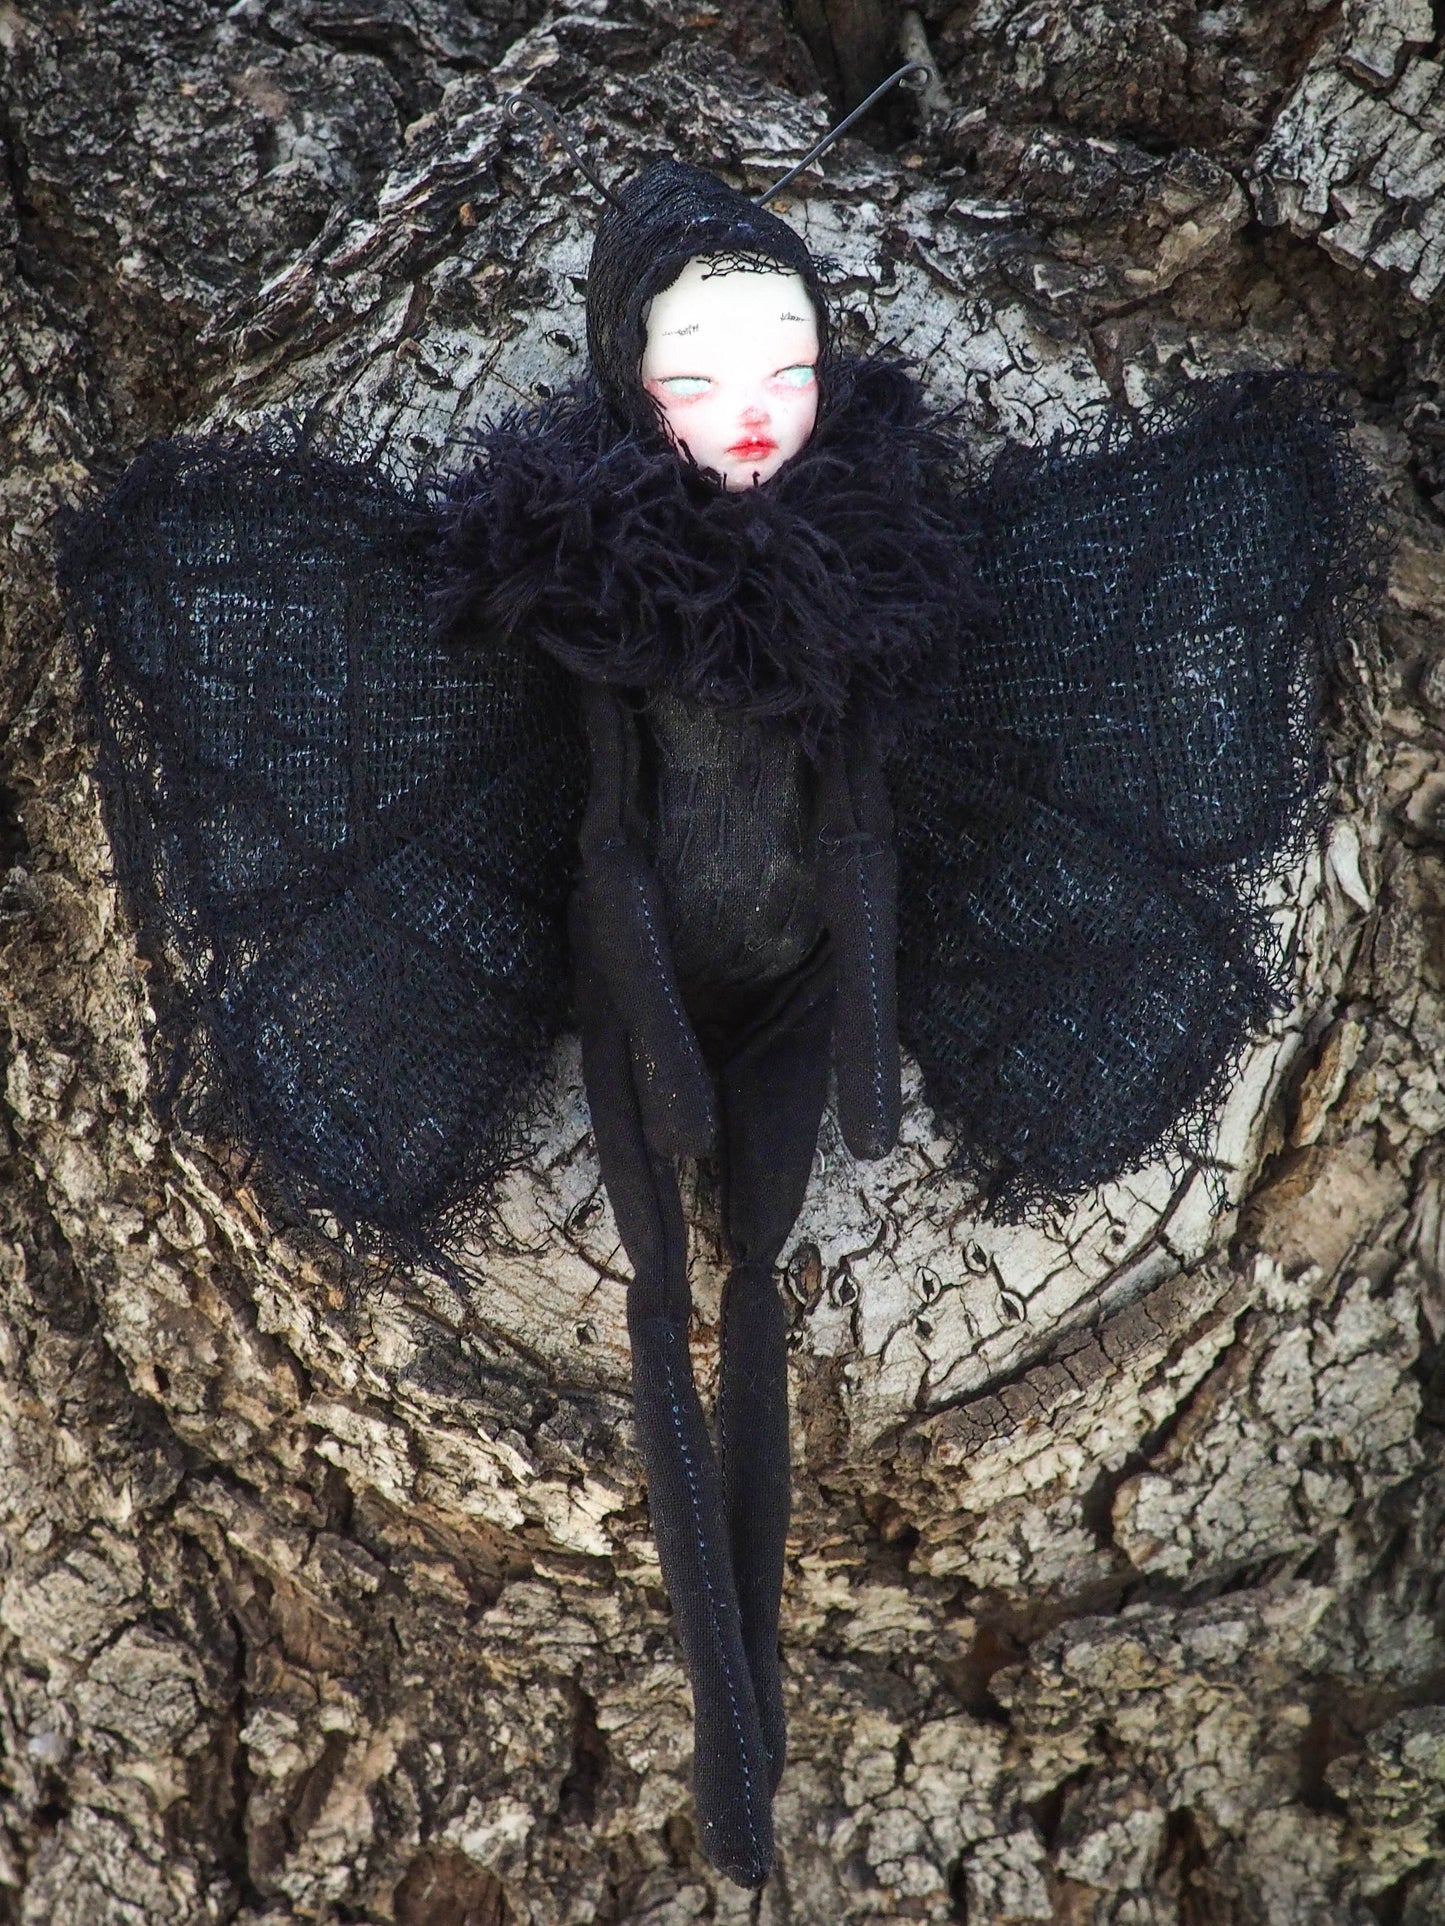 Original goth ard doll y Danita Art. Moth figurine toy perfect for the halloween collector who loves handmade unique surreal and whimsical art